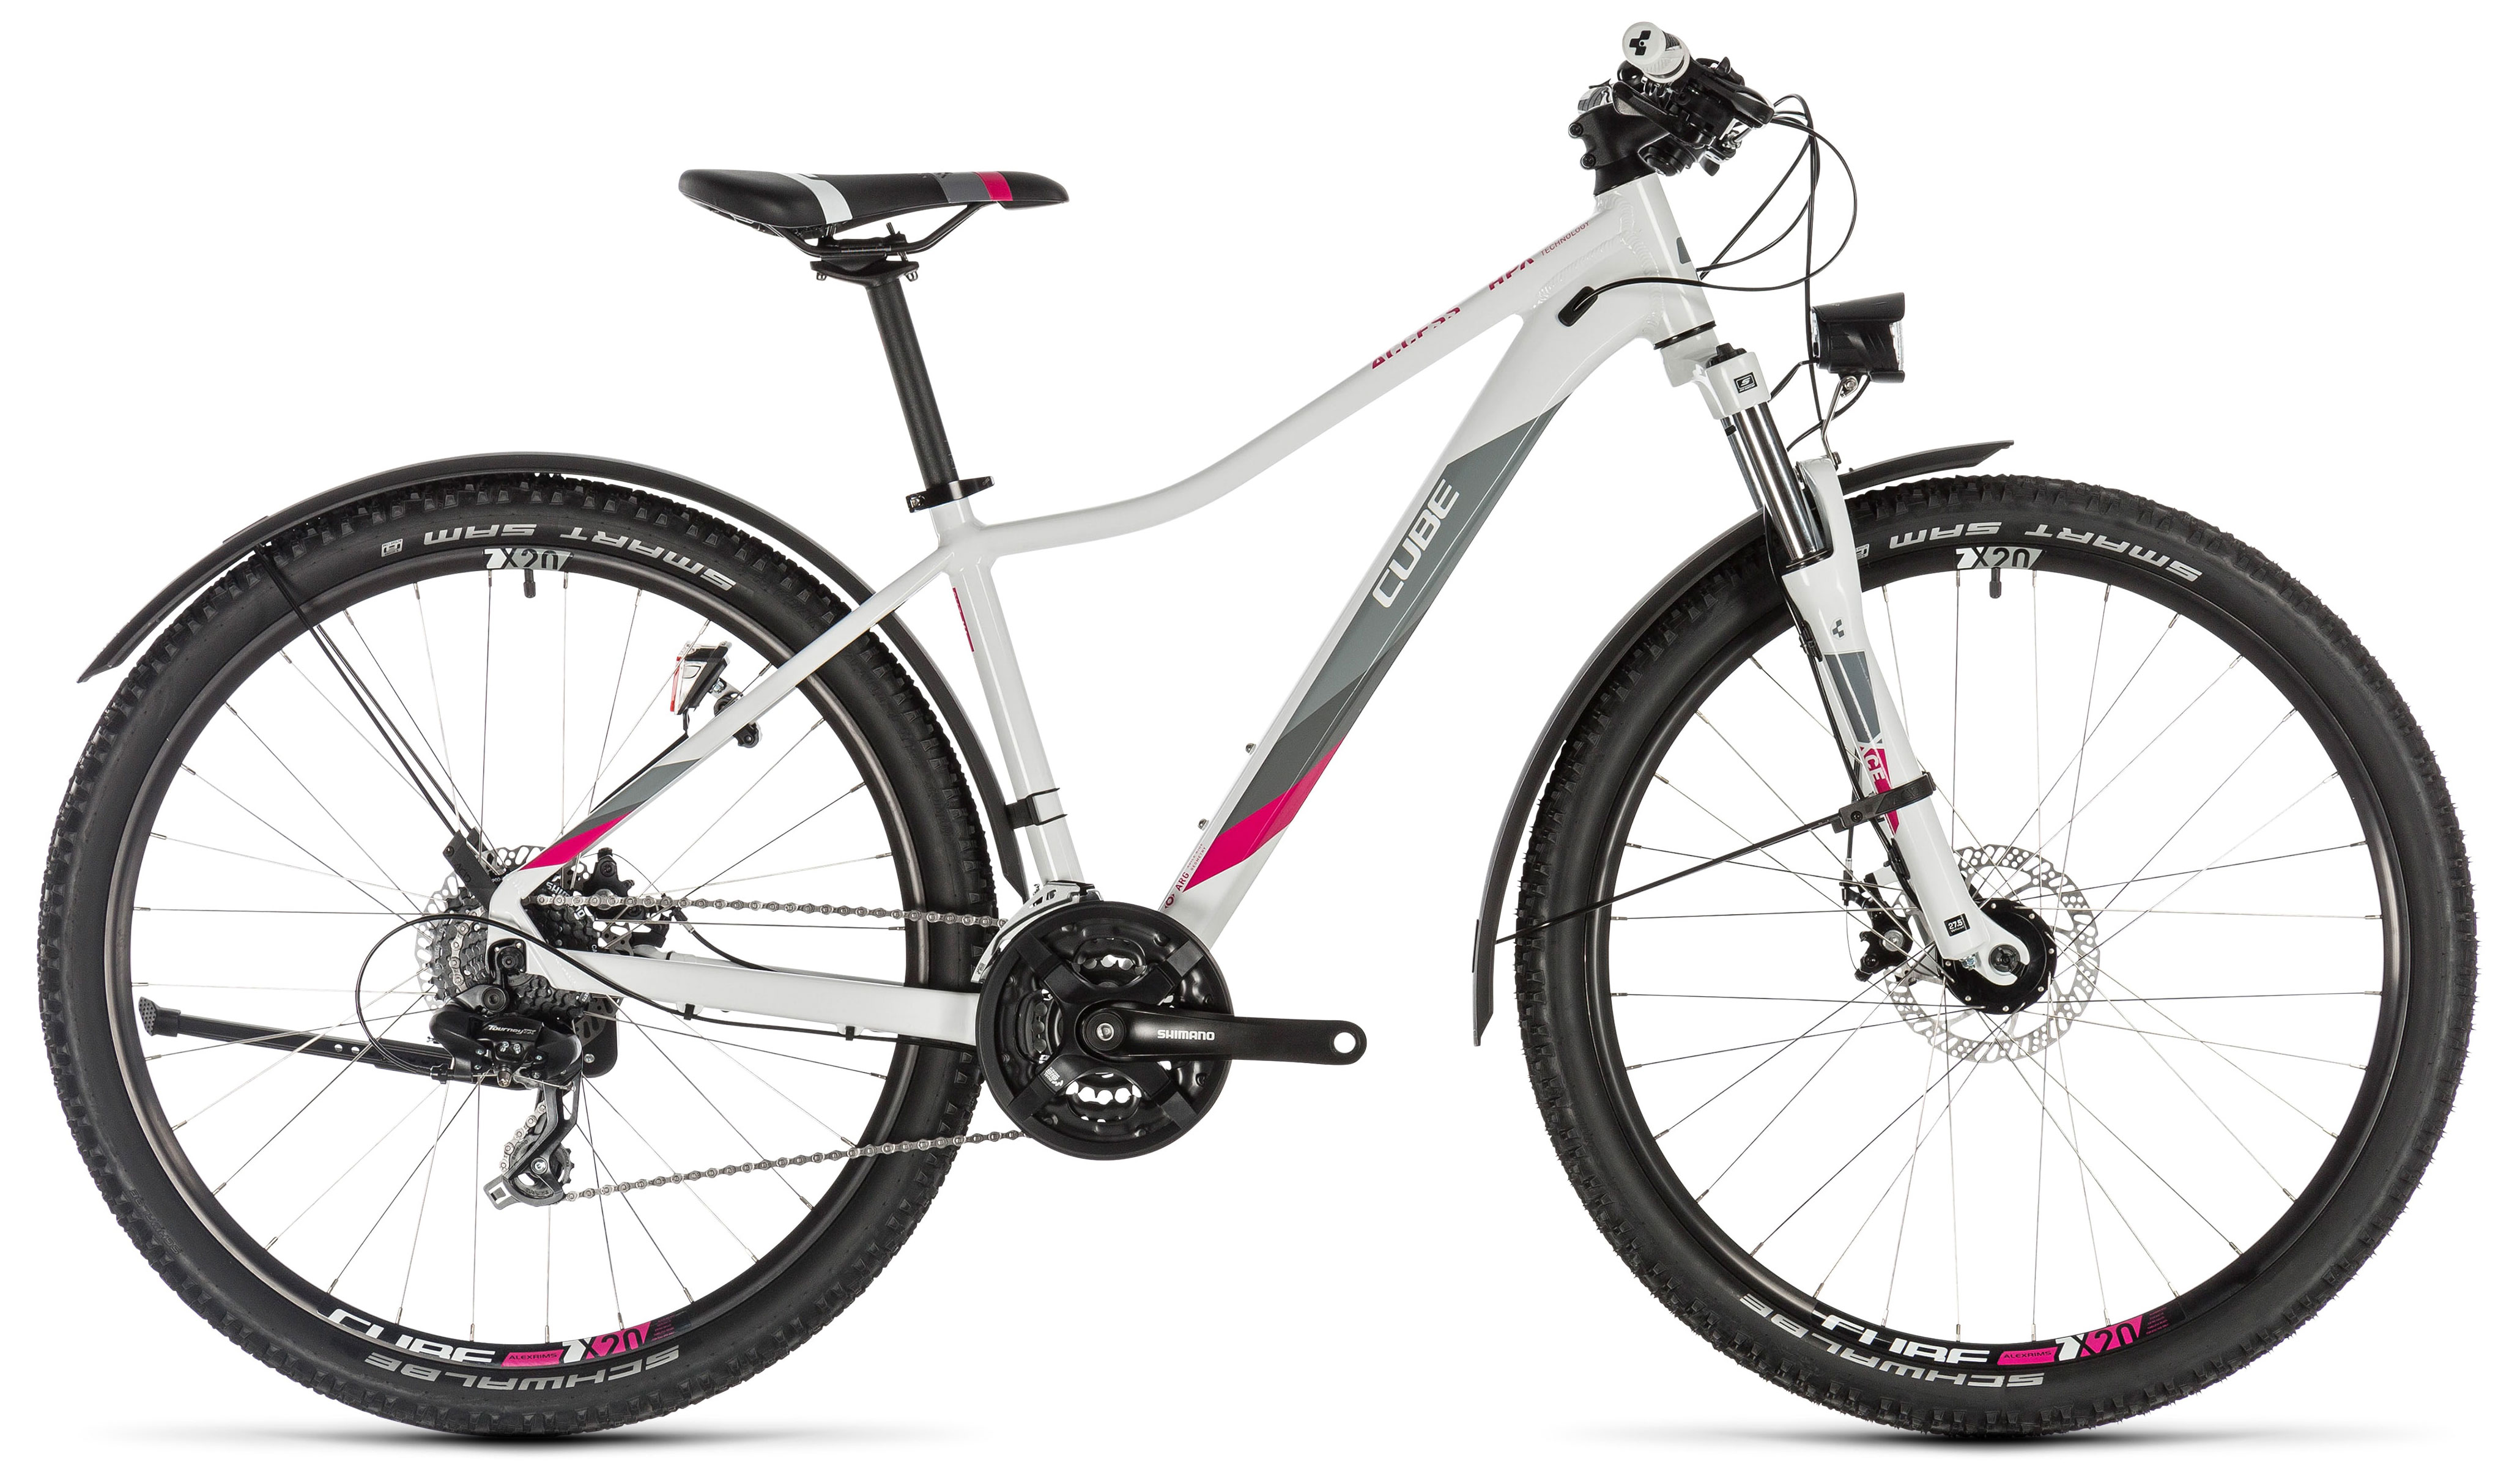  Велосипед Cube Access WS Allroad 27.5 2019